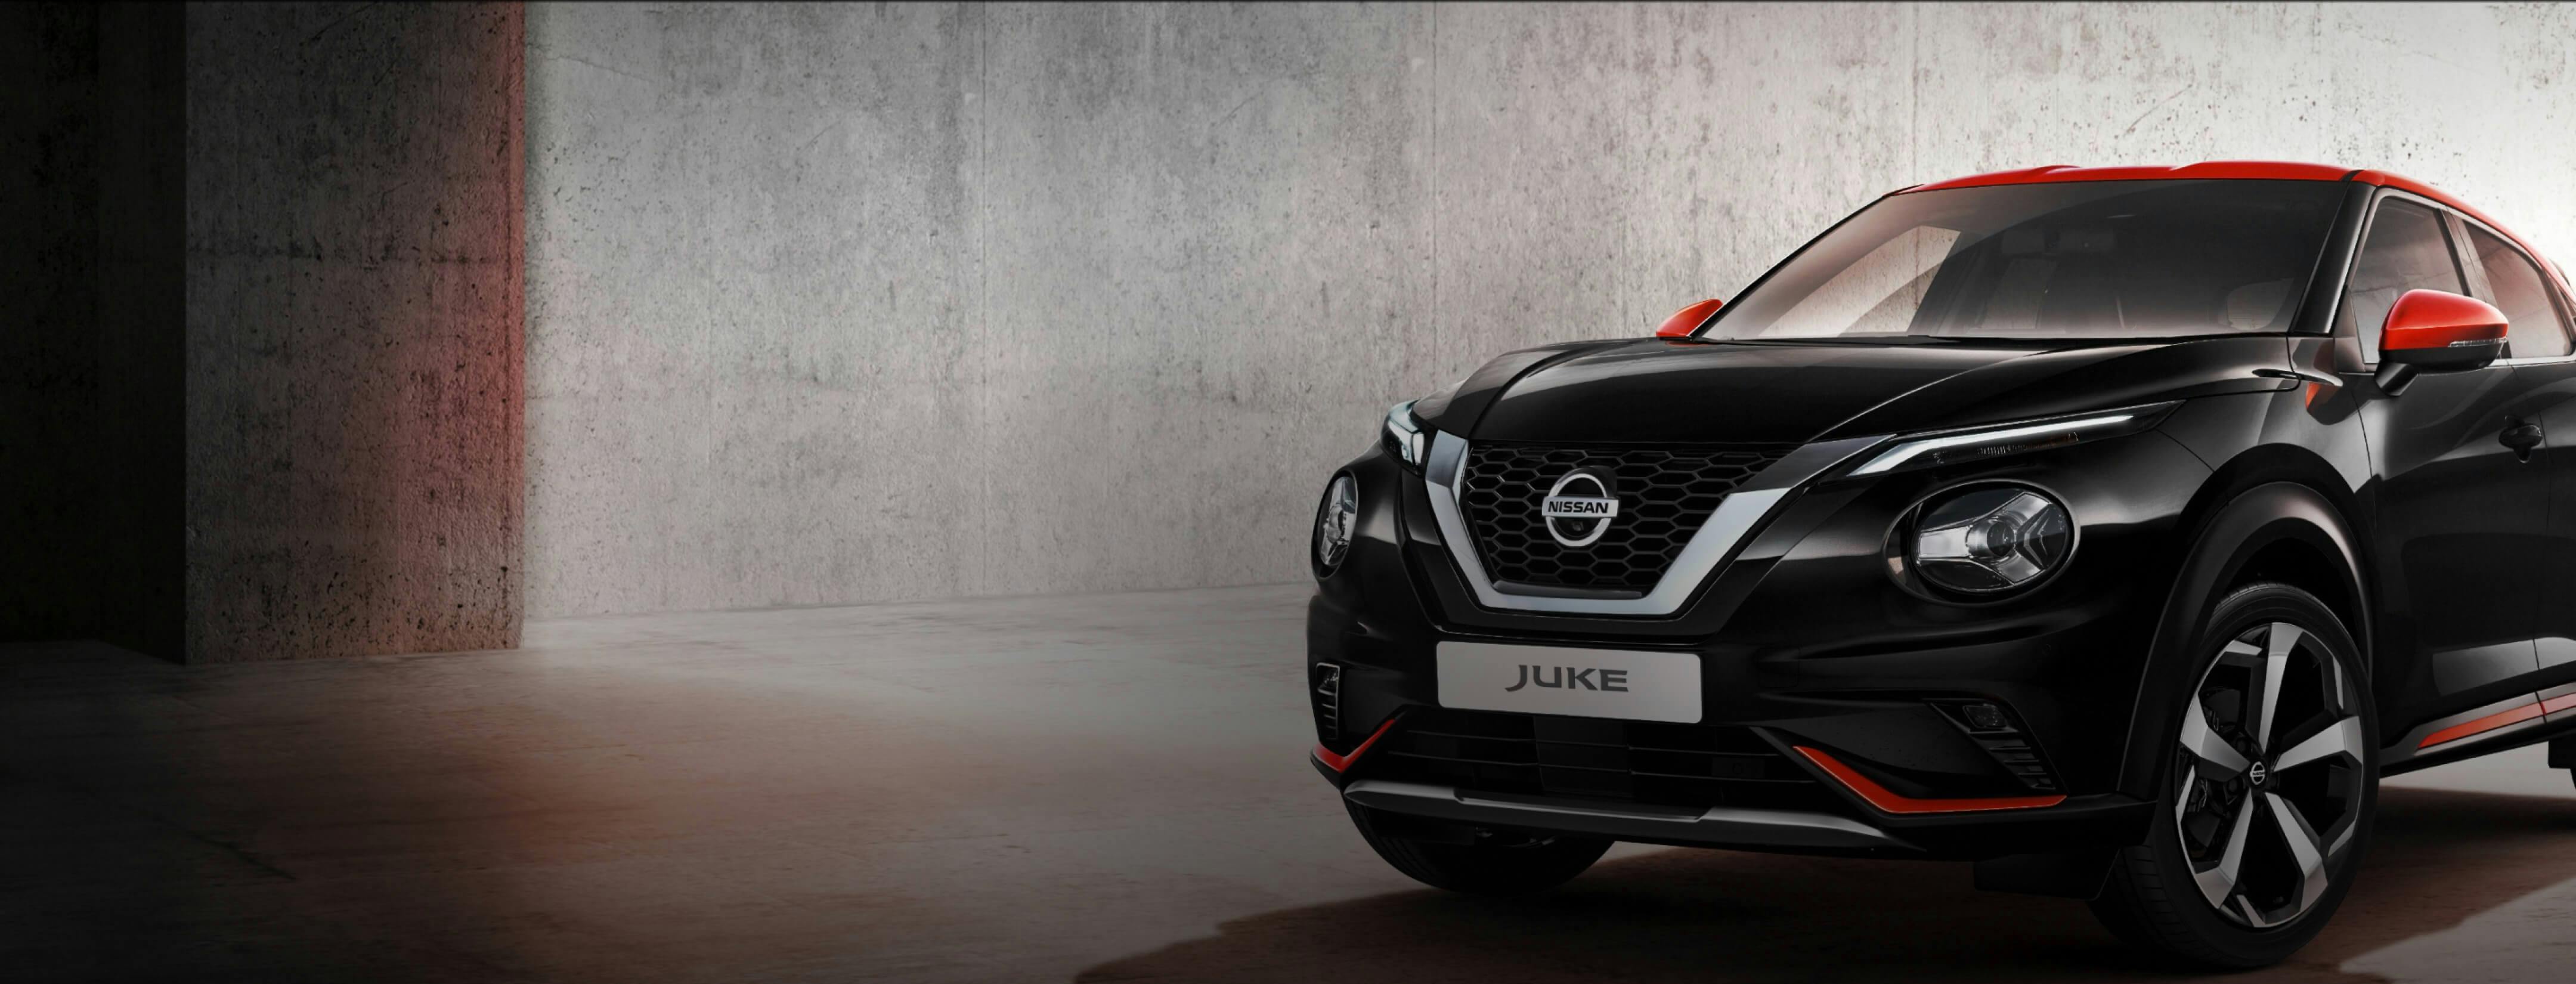 Rent a Nissan Juke, Long and short term, Virtuo